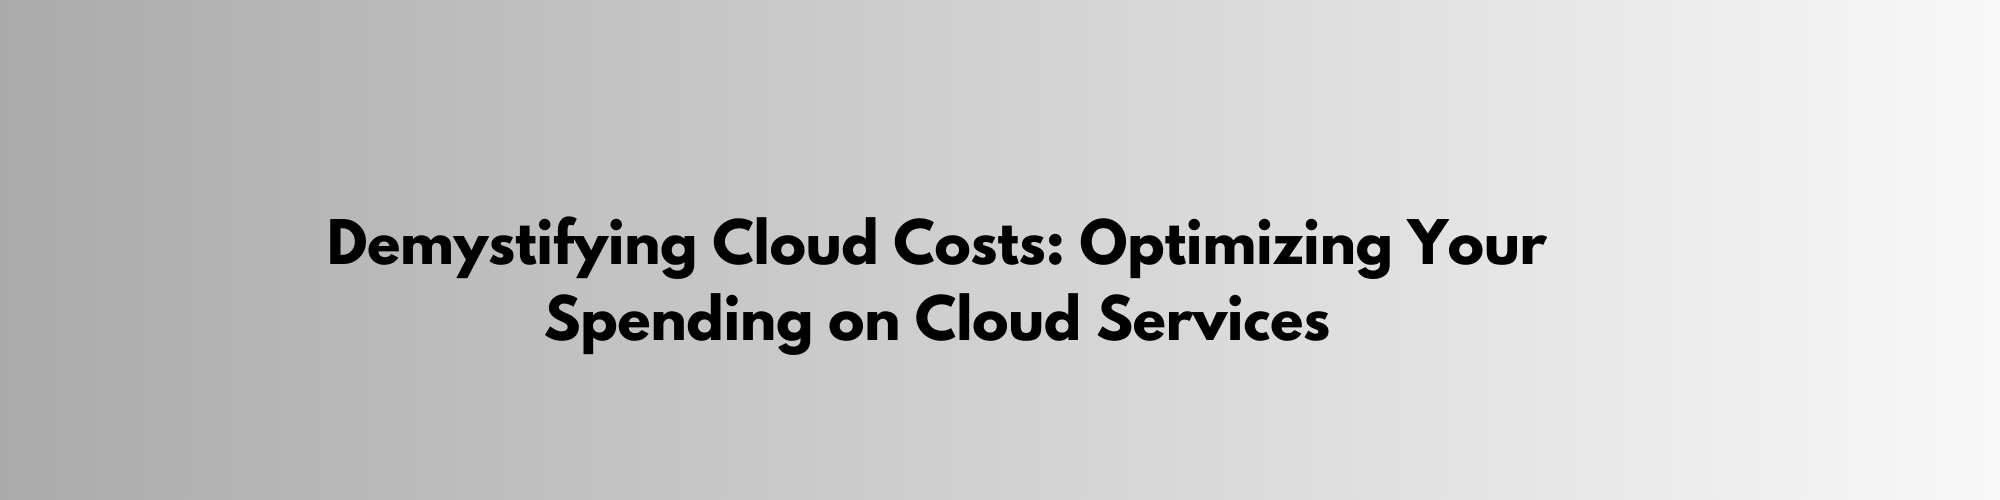 Demystifying Cloud Costs: Optimizing Your Spending on Cloud Services